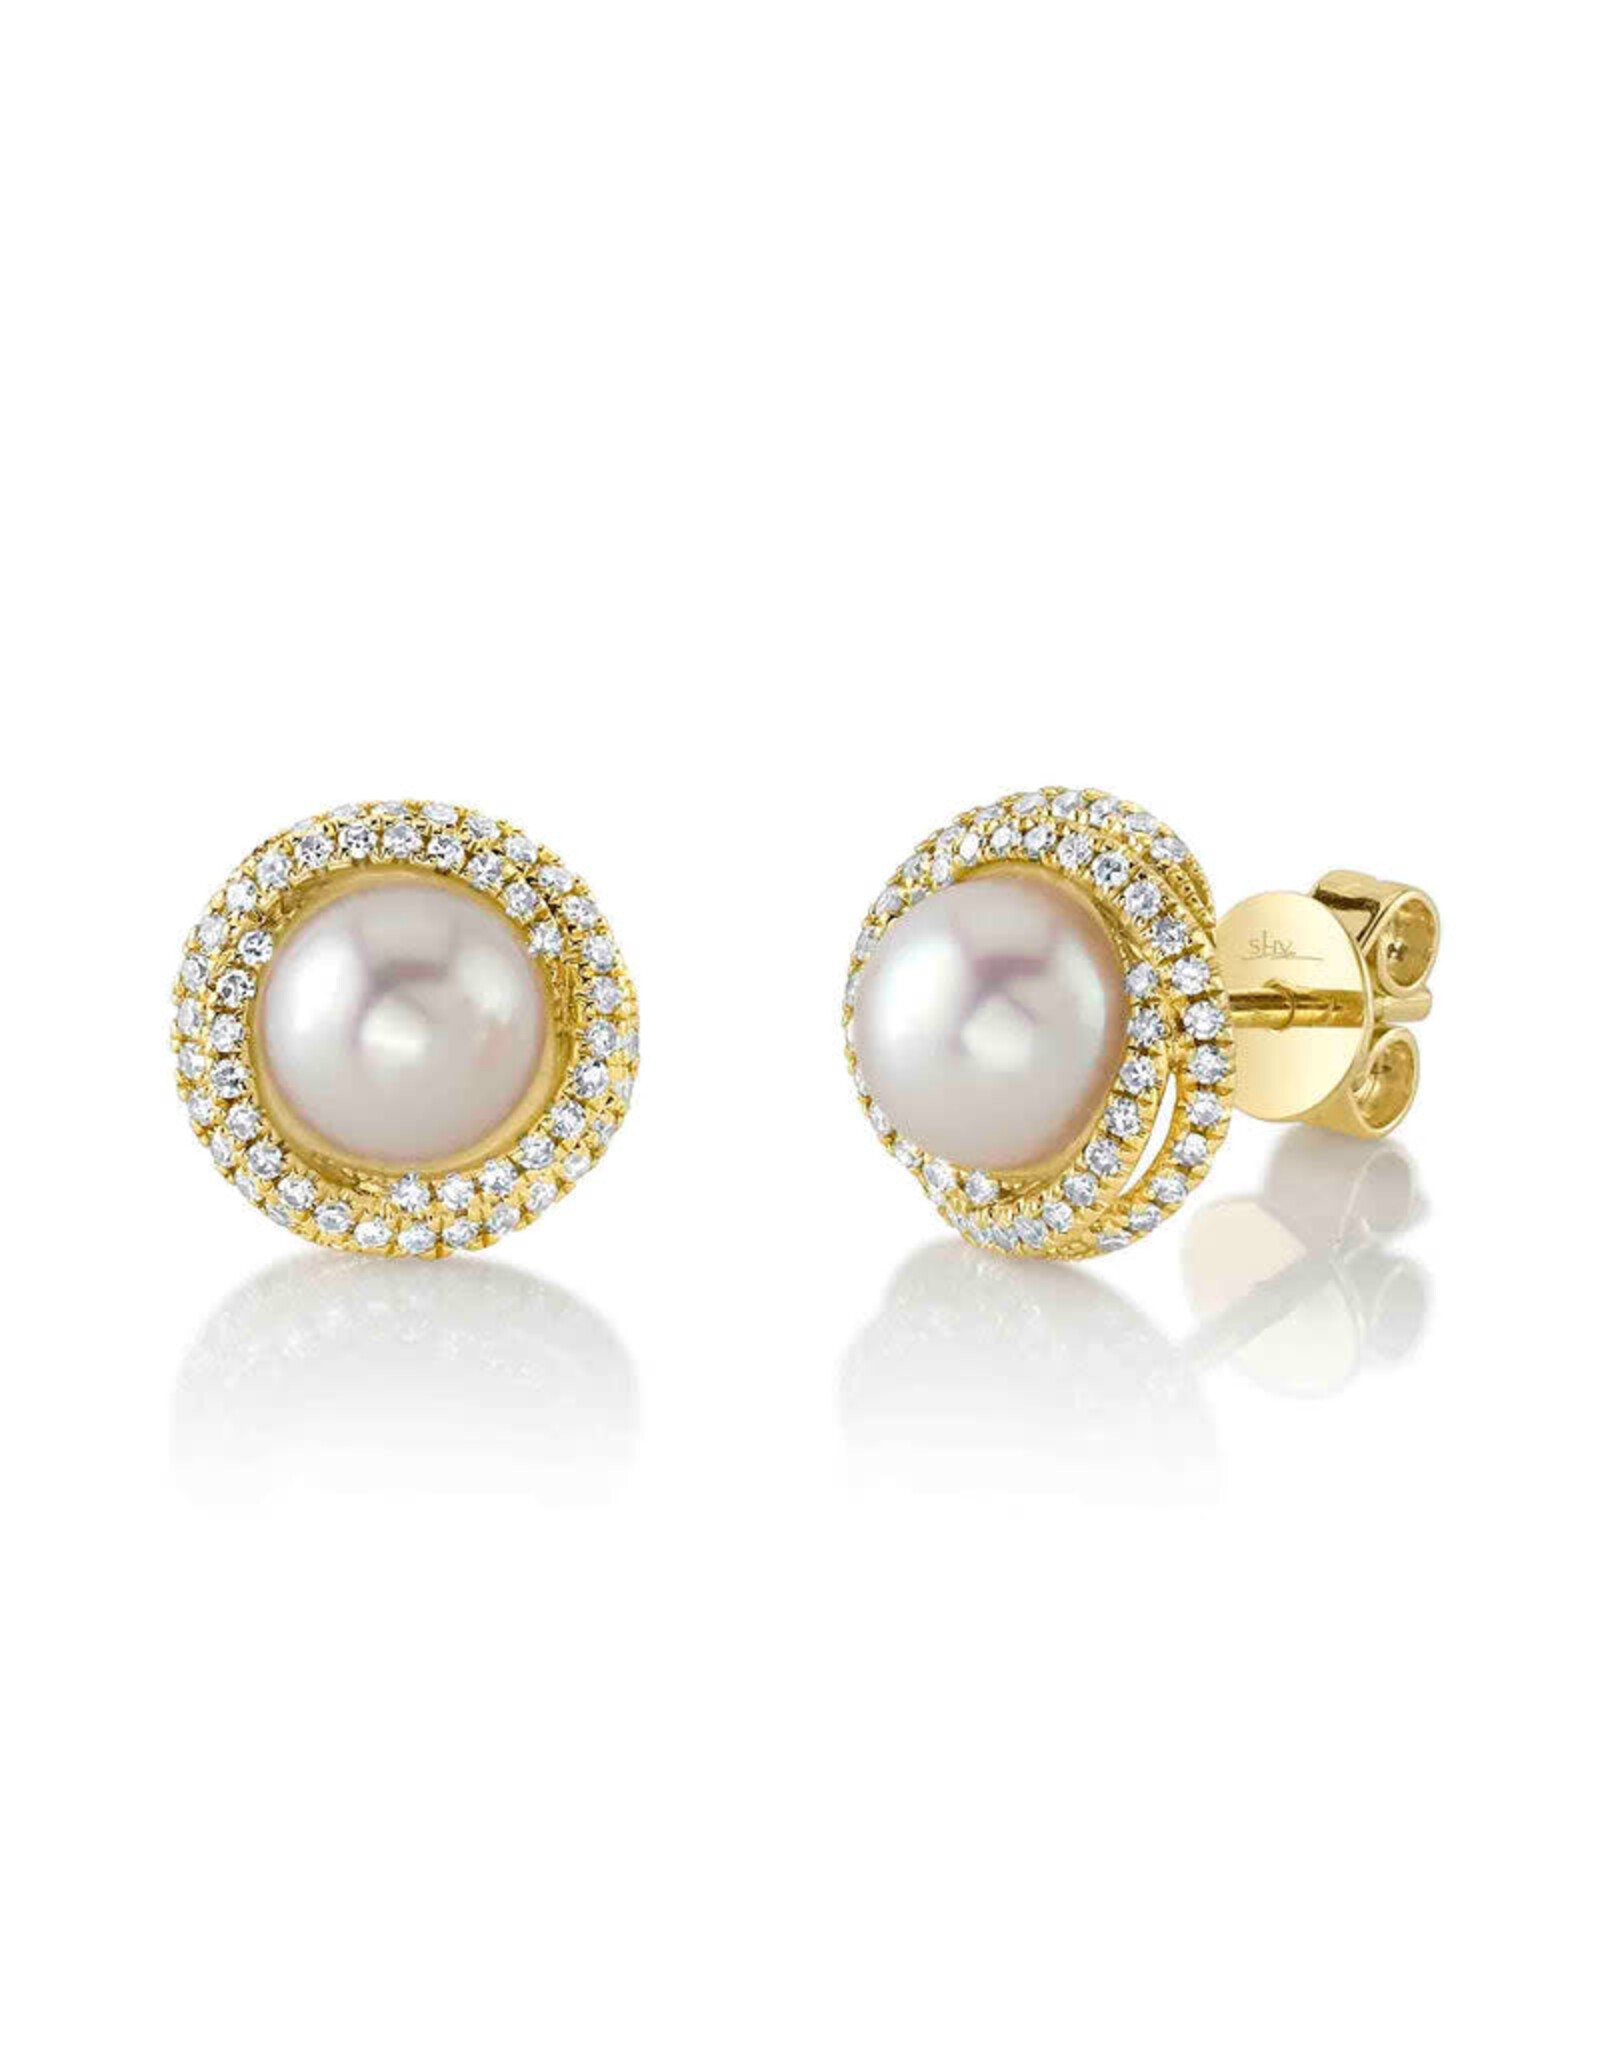 14K Yellow Gold Pearl and Diamond Stud Earrings, P:6.5mm, D: 0.26ct